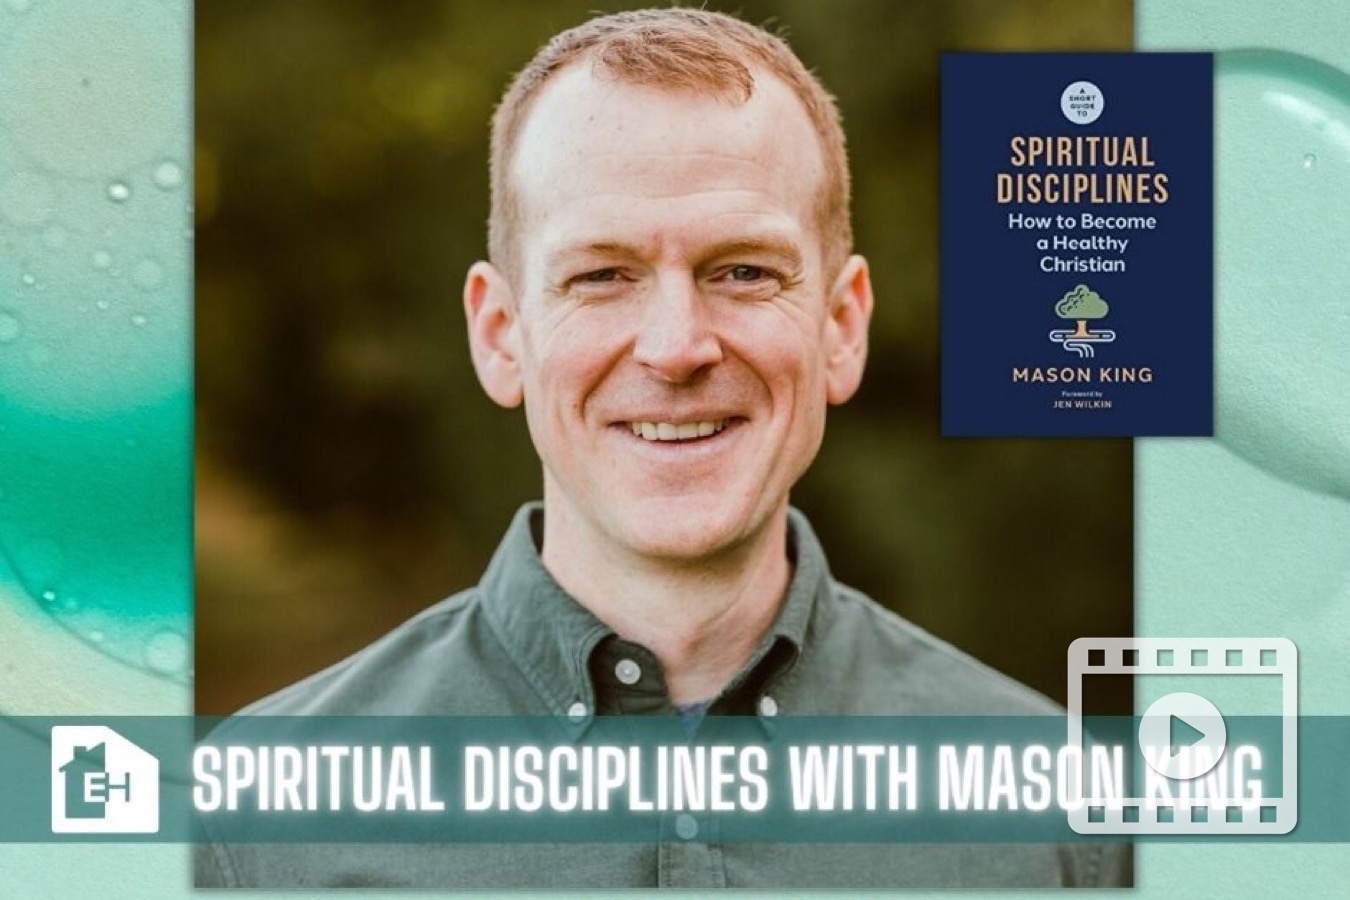 EH Podcast: Spiritual Disciplines with Mason King